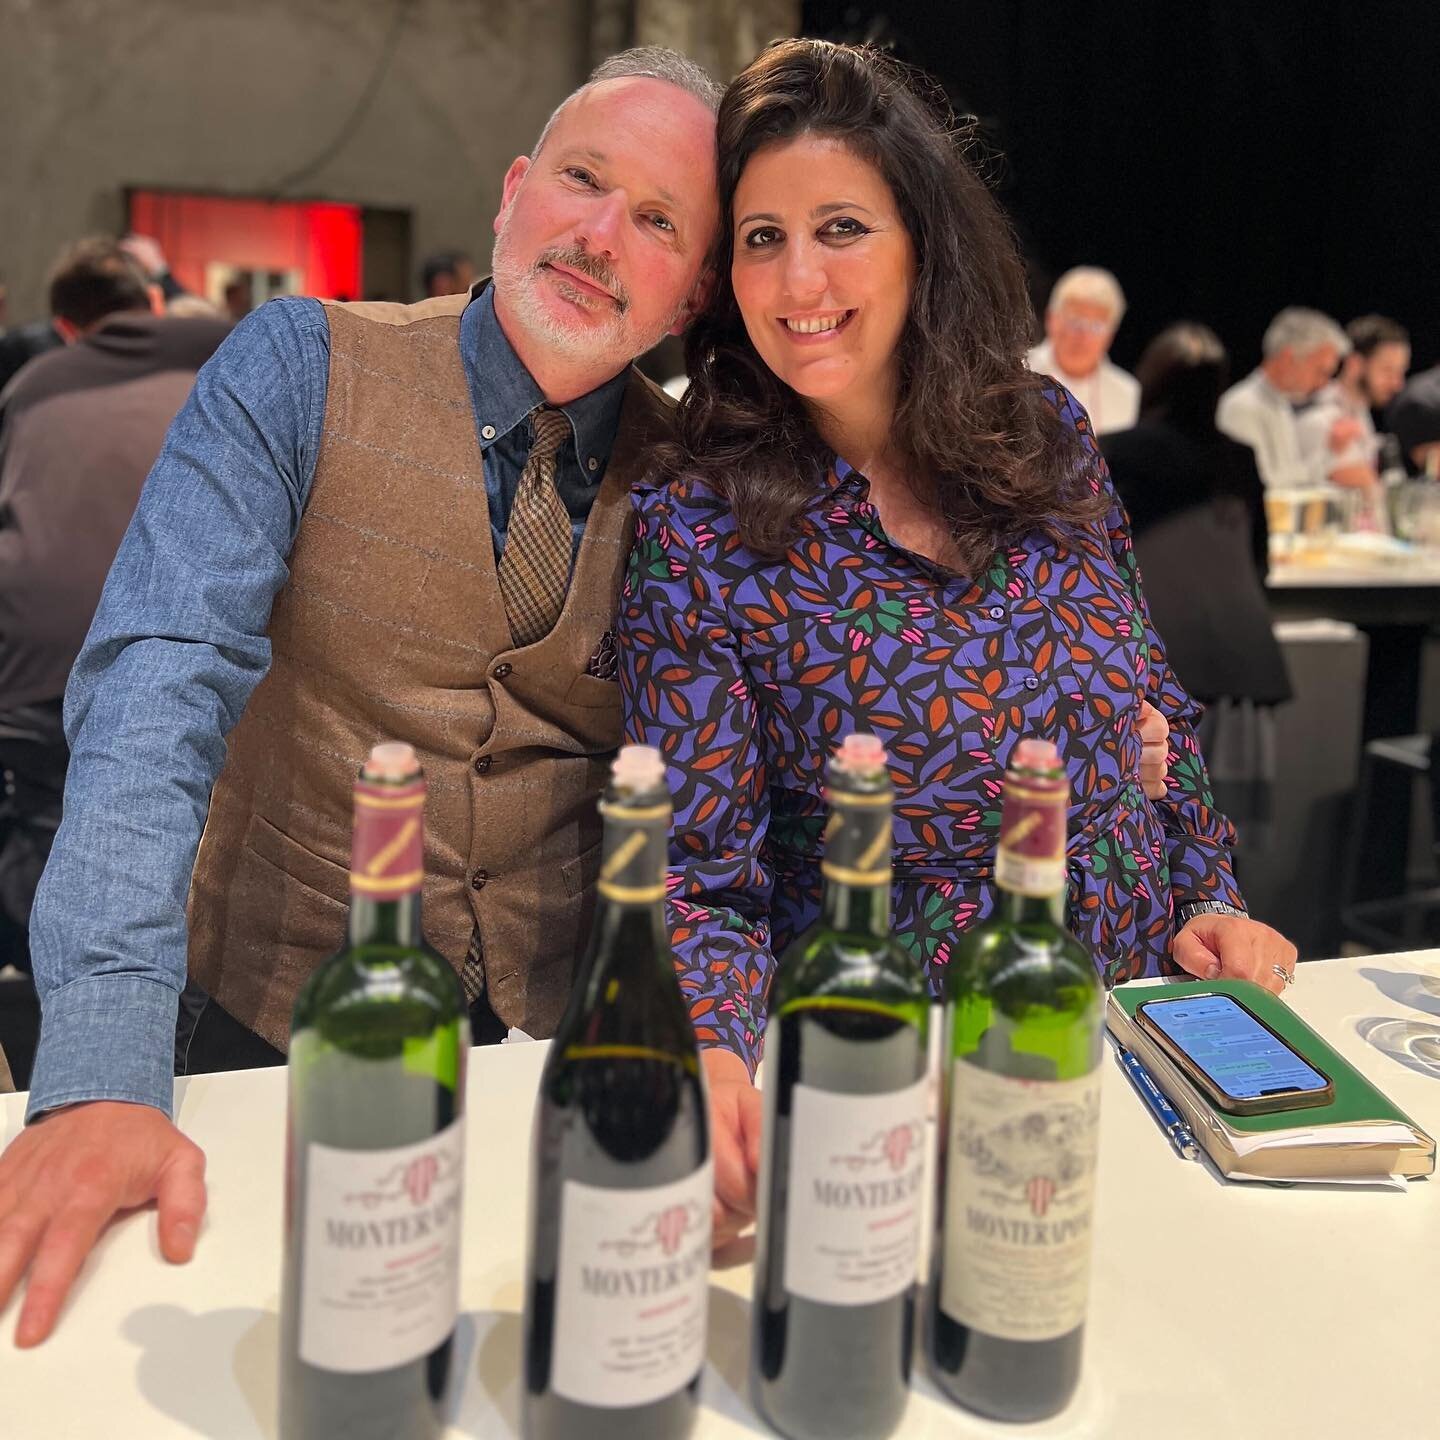 Great time yesterday in Florence at the Chianti Classico Collection, the annual anteprima event which this year celebrates the Consortium&rsquo;s 100th anniversary. The new releases are bellissimi, we can&rsquo;t wait to have them on American soils s